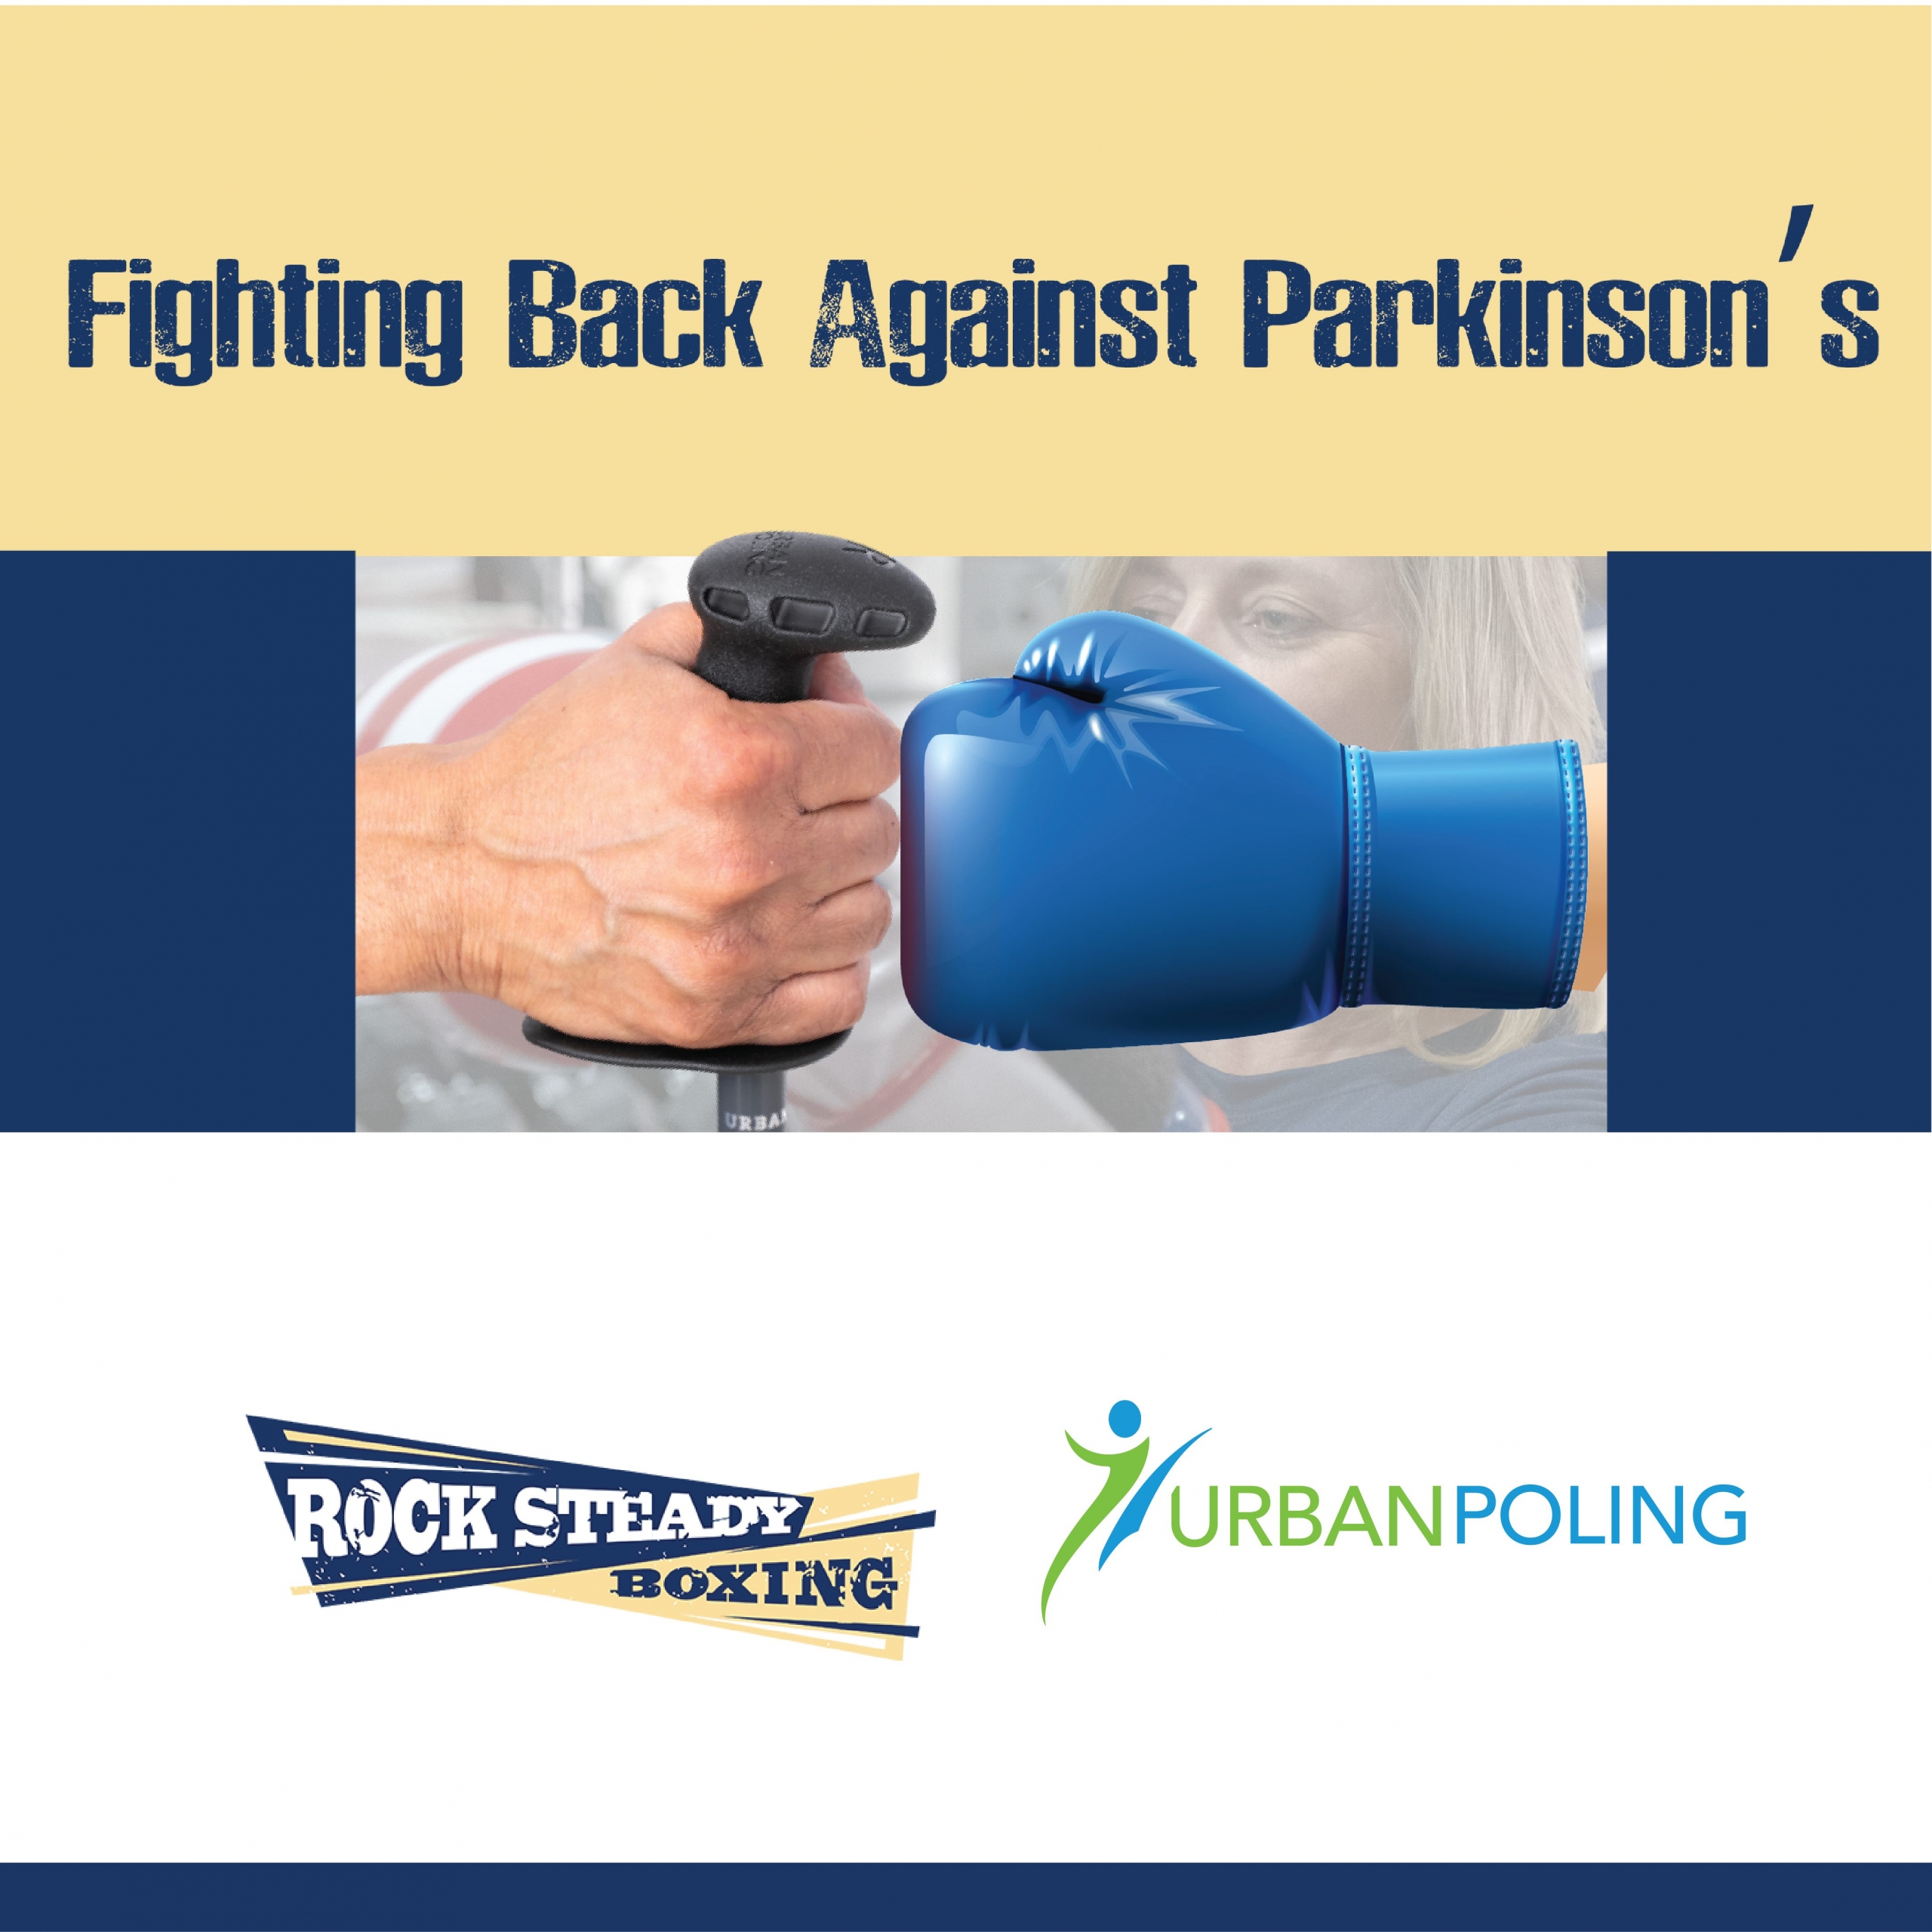 Rock Steady Boxing and Urban Poling Team Up to Fight Parkinson’s Disease